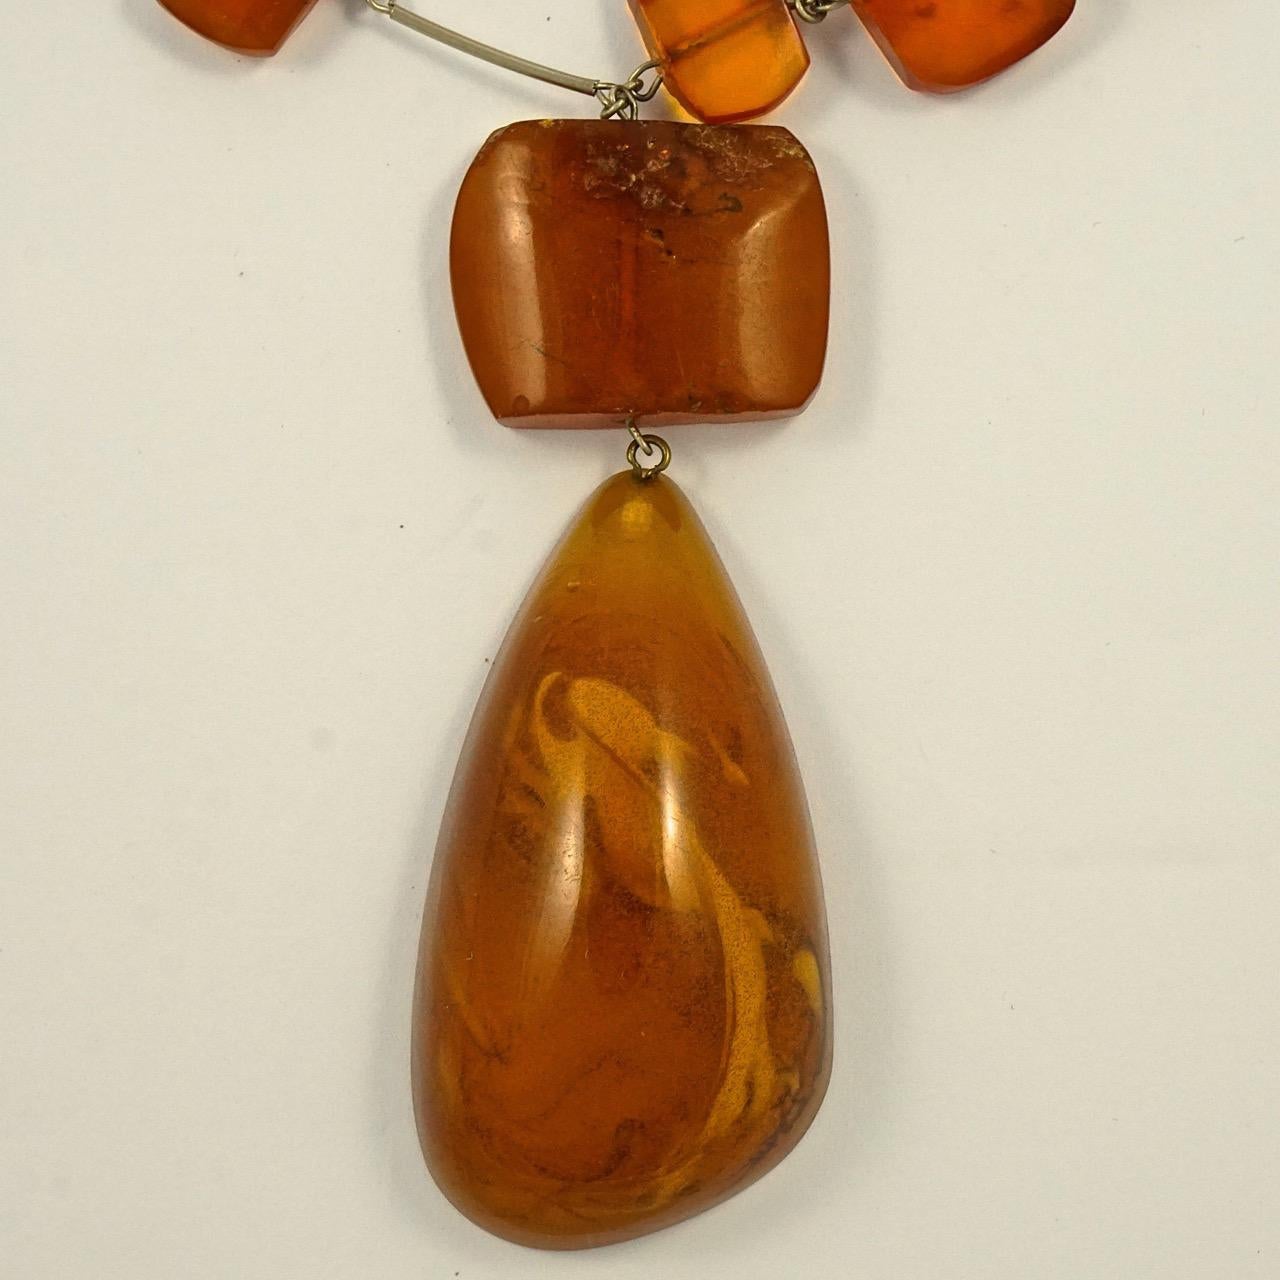 Fabulous silver tone link necklace with a double strand of polished amber beads, and a lovely large amber drop. Inside the drop are hundreds of tiny air bubbles. The longest strand is length 79cm / 31.1 inches, and the drop is length 6.2cm / 2.4